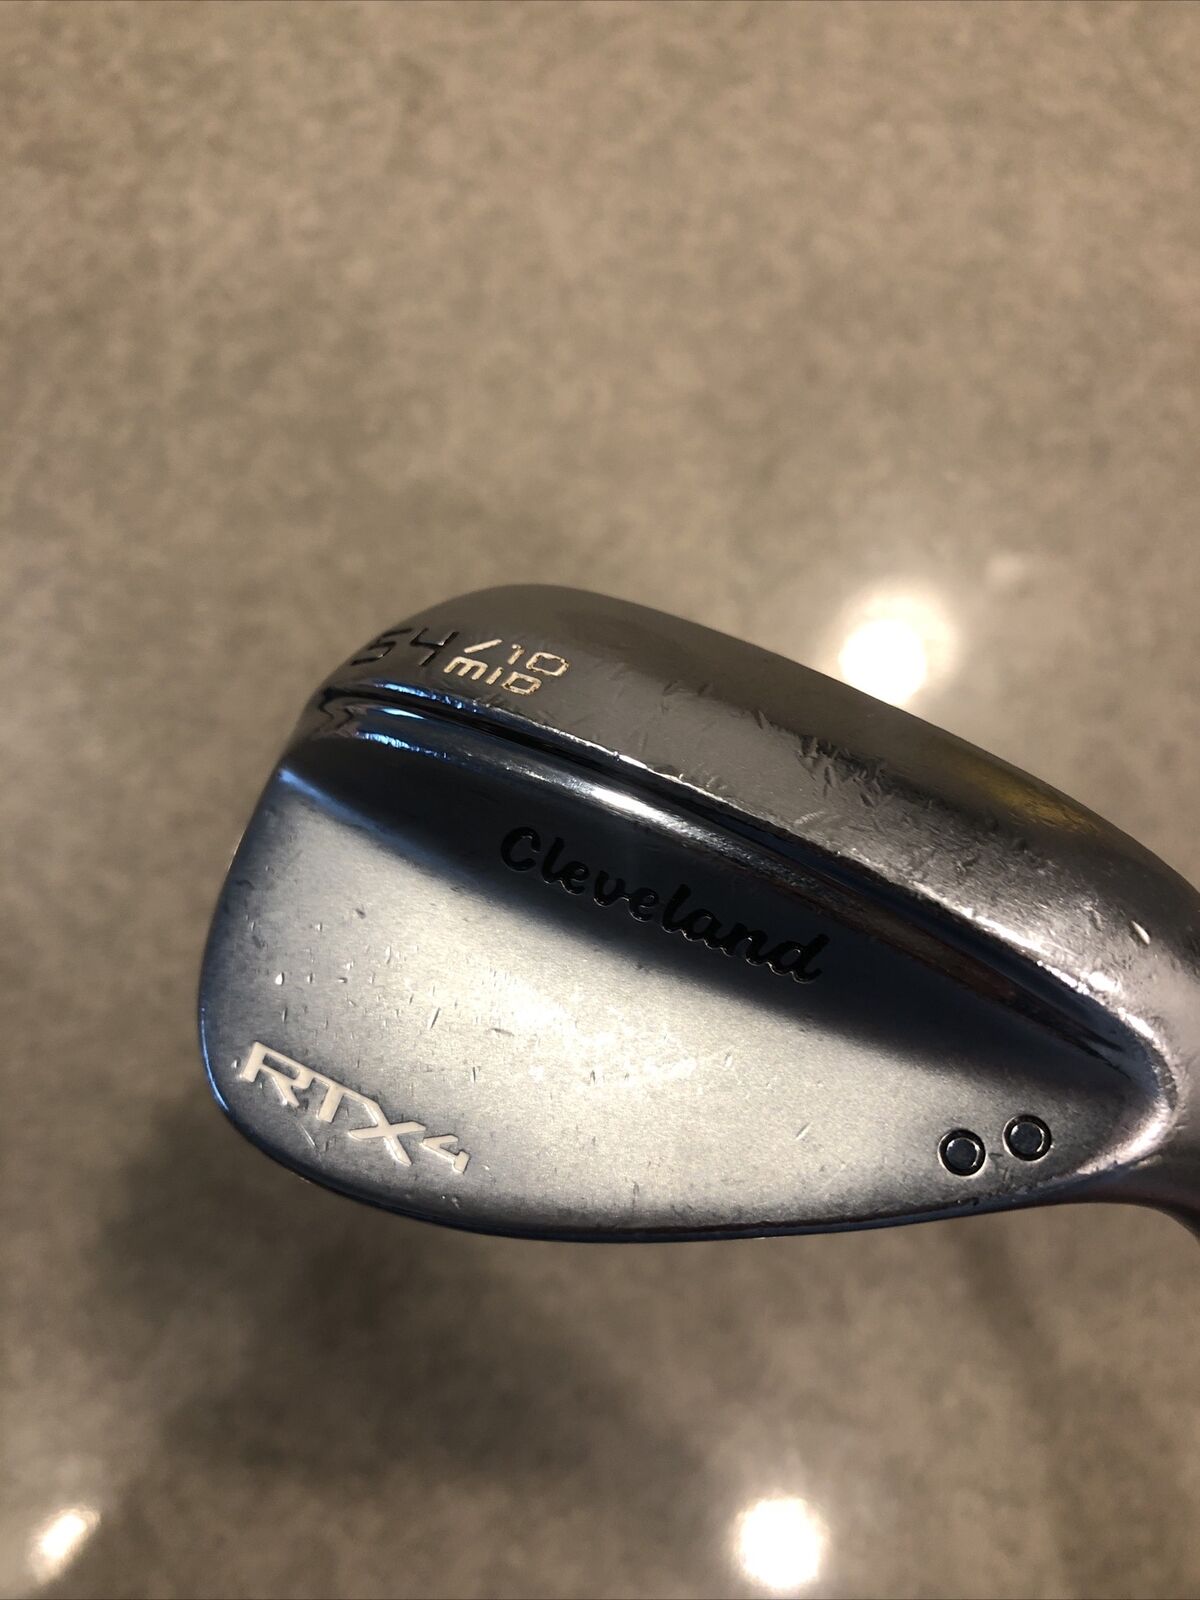 Cleveland RTX-4 Chrome 54-10 54° SW, Nippon NS Pro Wedge Shaft, VG Condition.